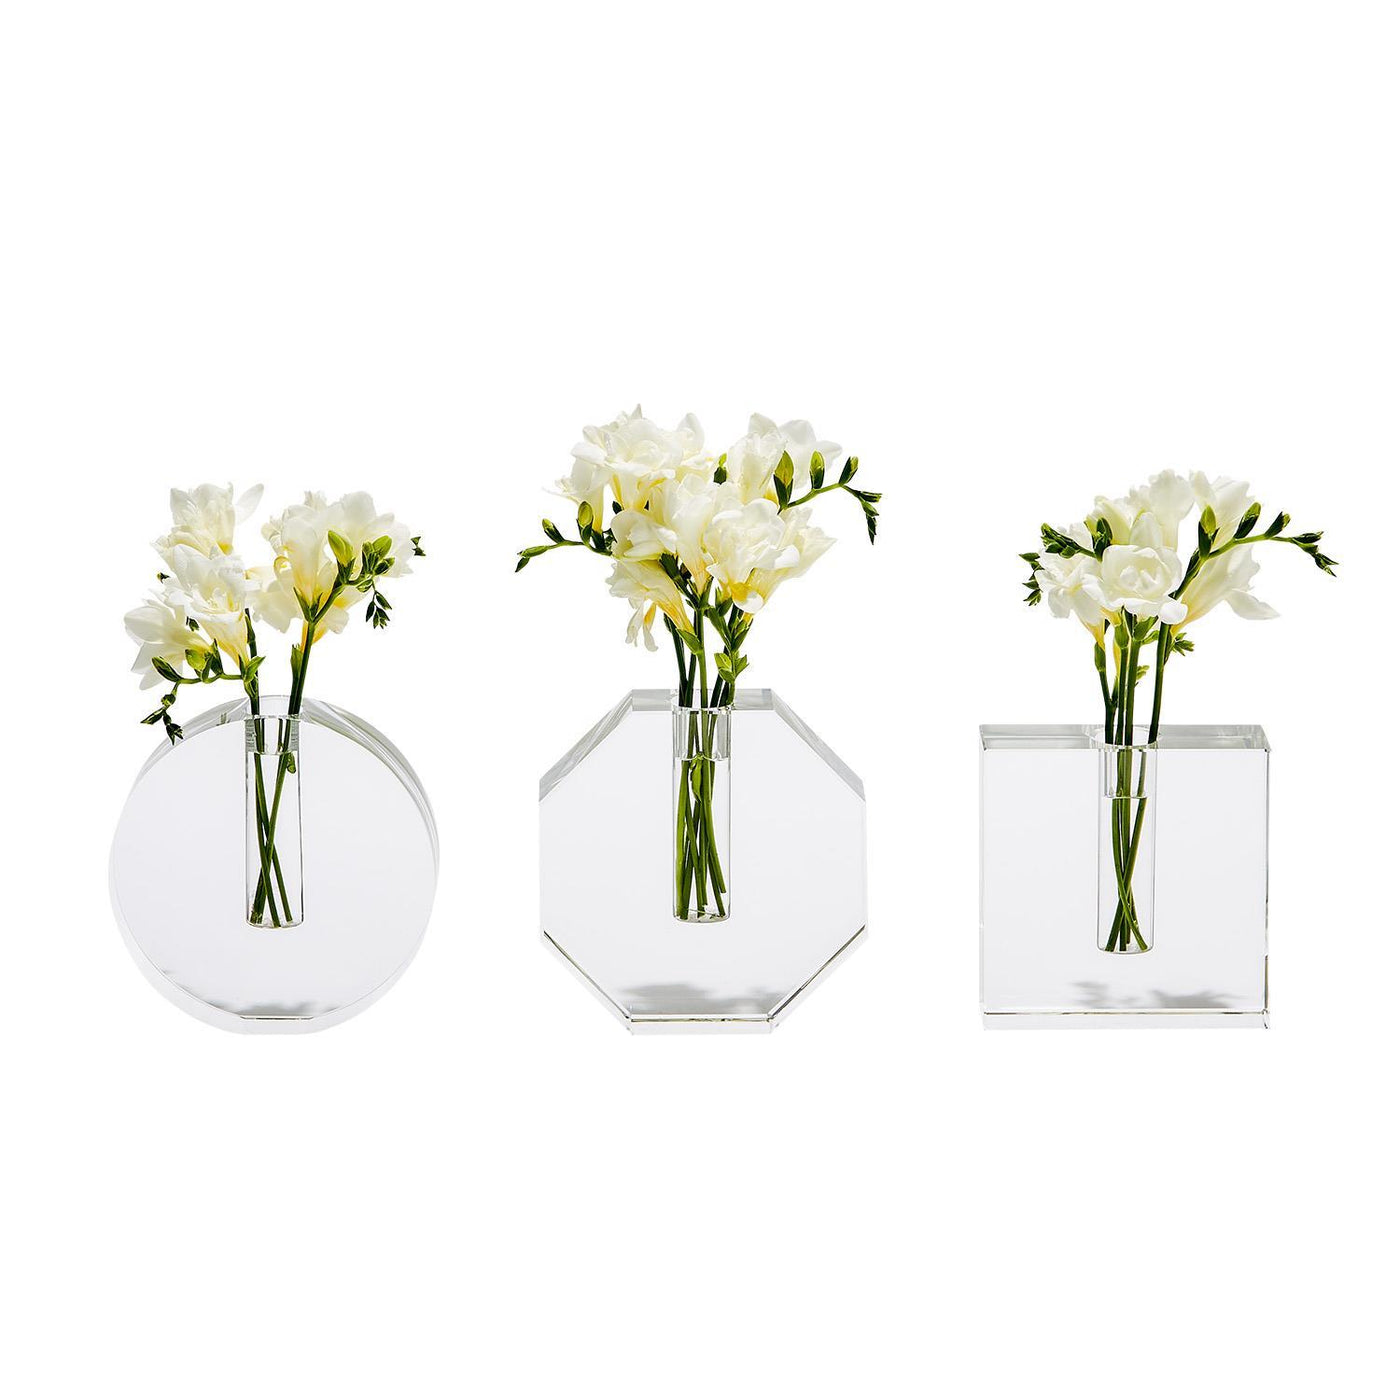 BUD VASE CRYSTAL (Available in 3 Shapes)